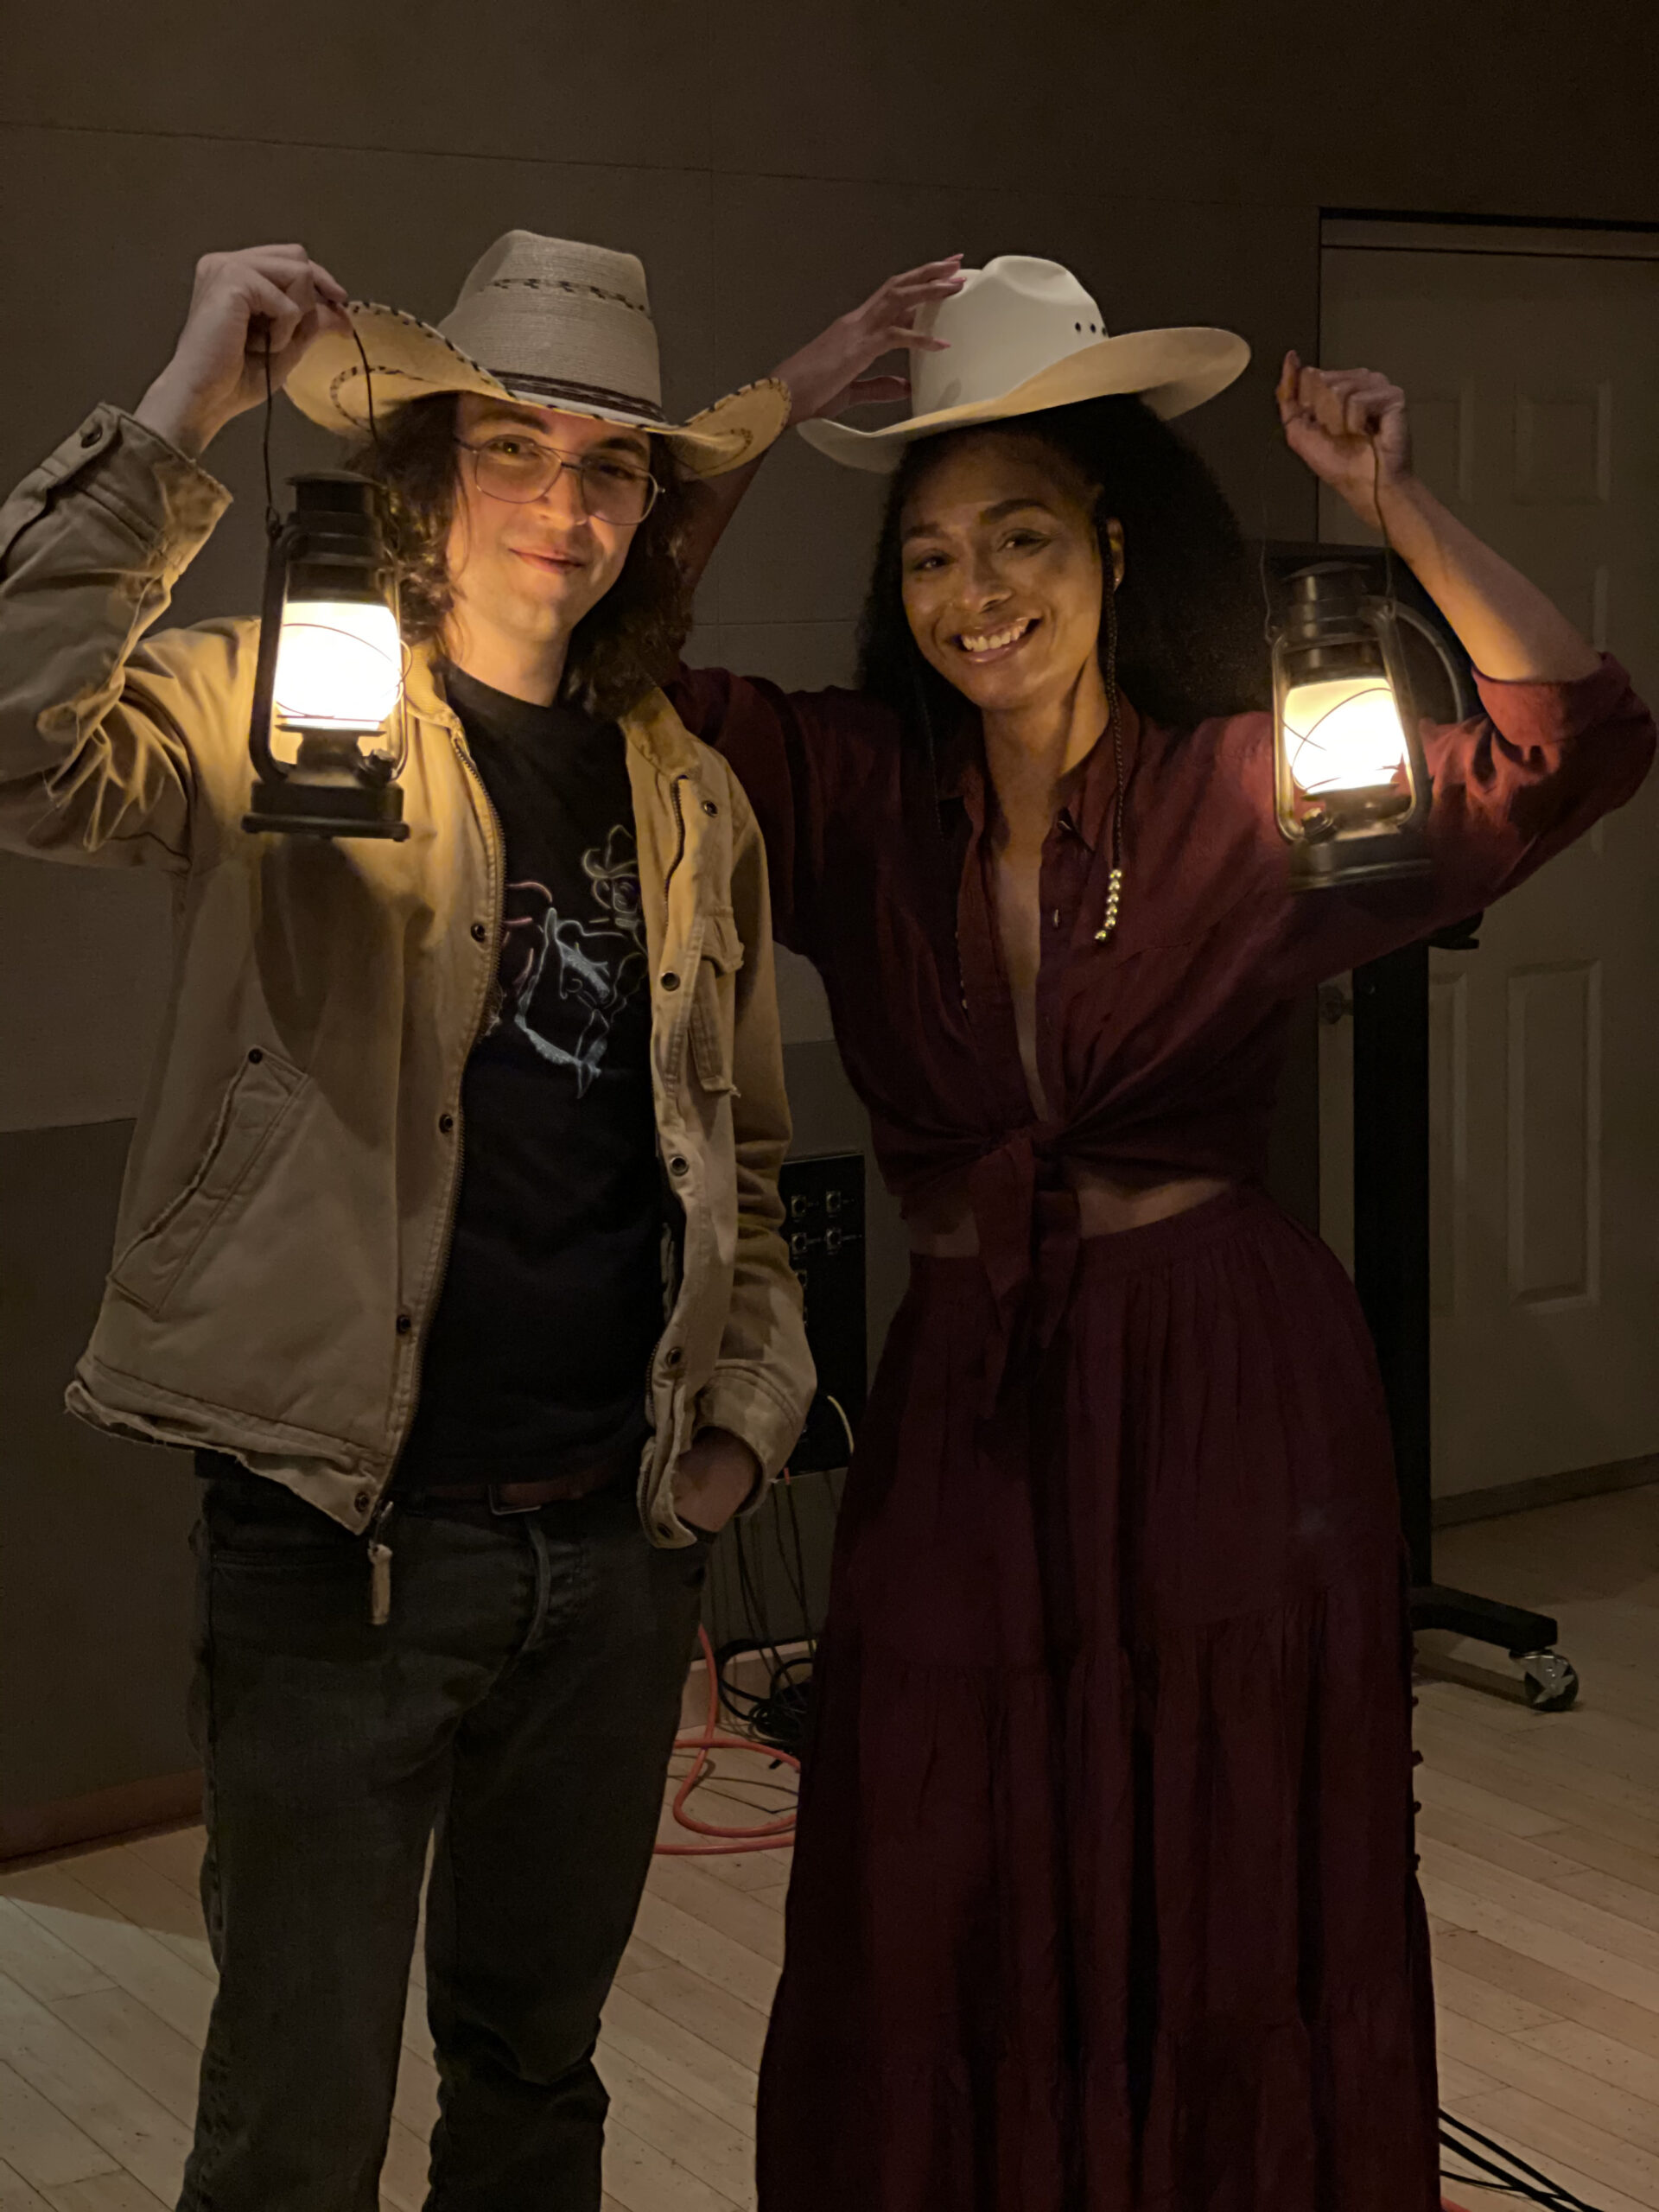 A man and a woman wearing cowboy hats stand in the dark holding lanterns